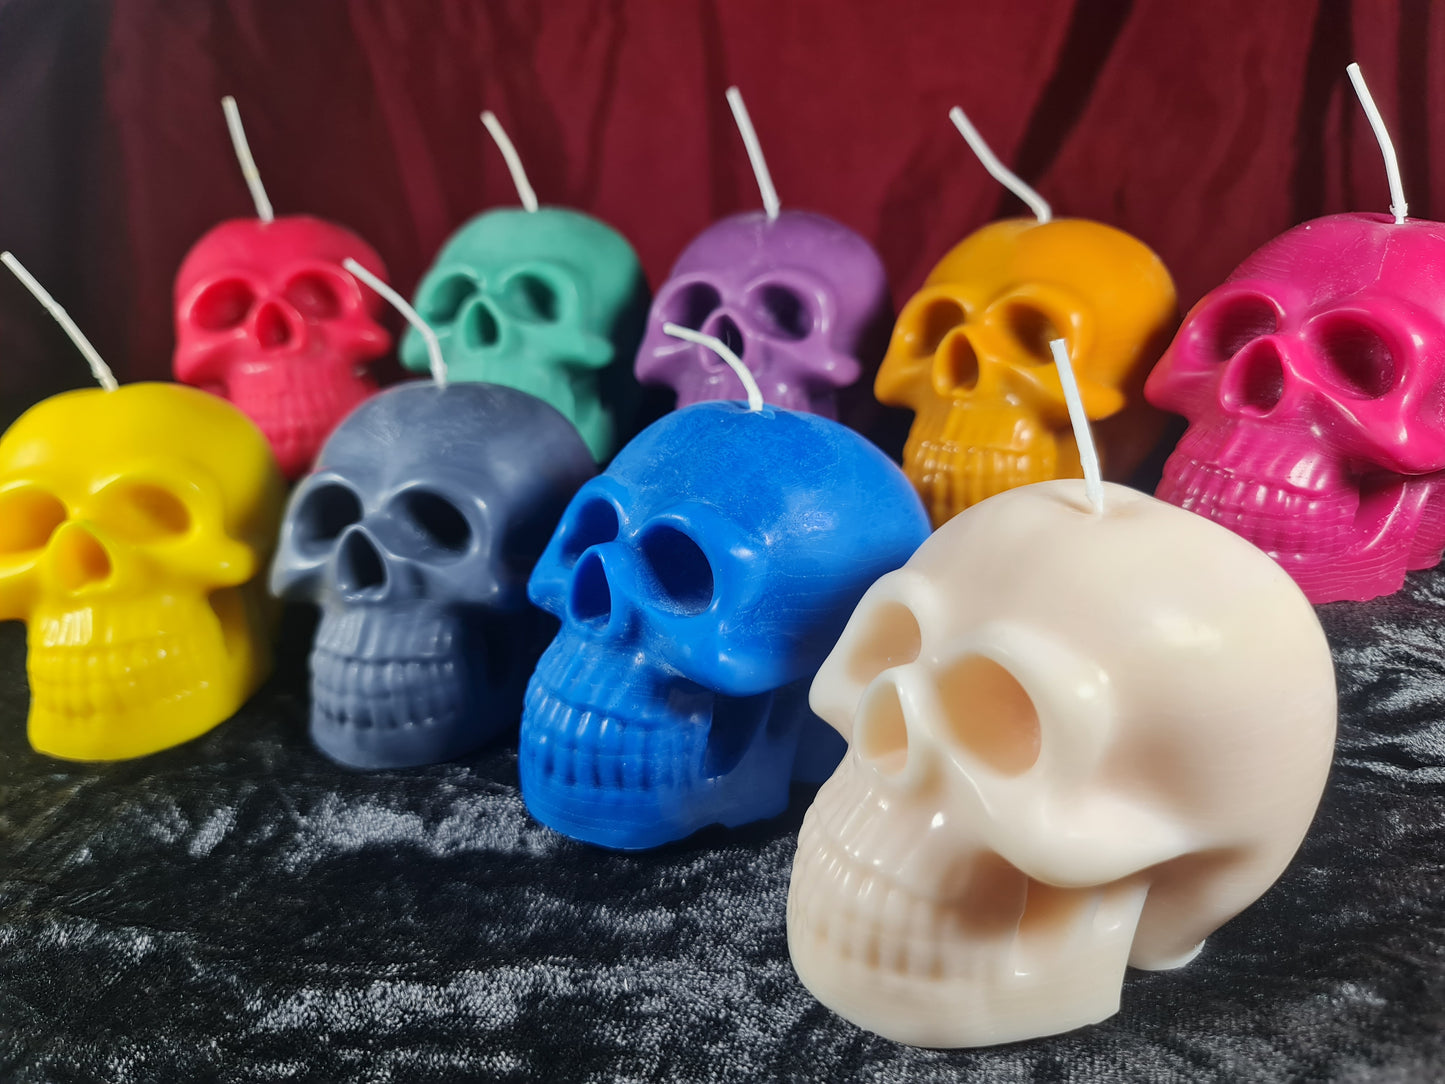 Skull Candle for Wax Play